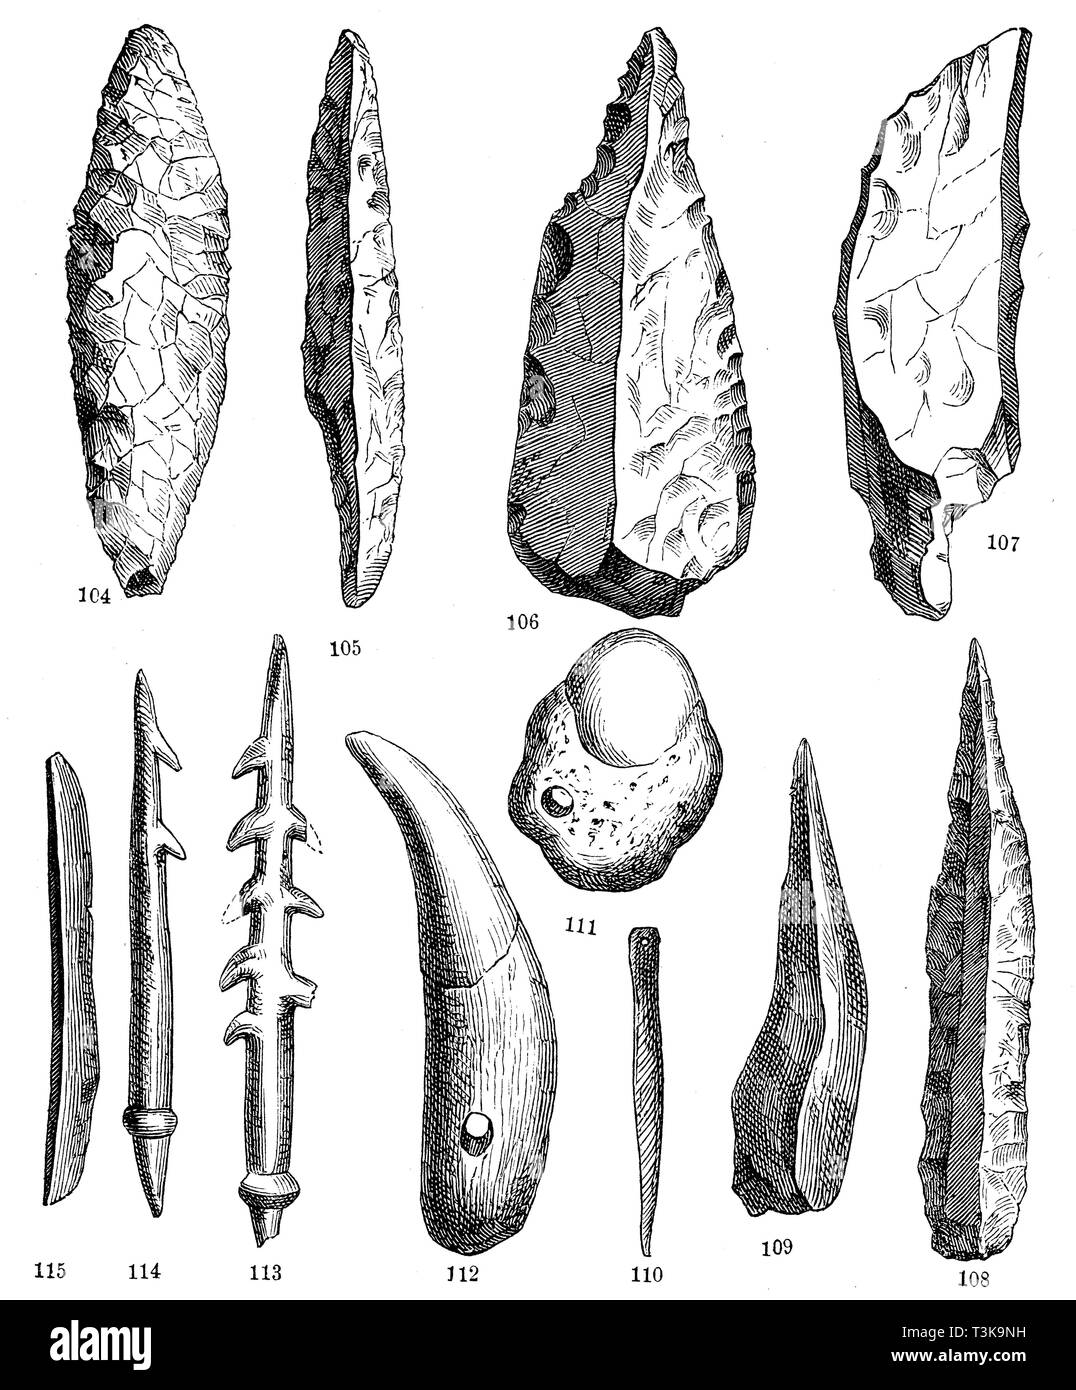 Weapons, objects made of stone and bone, as well as jewellery from the reindeer age. 104) Stone spearhead from the cave of Laugerie Basse. 105) Flint knife. 106) Stone axe. 107) Scraper blade made of stone. 108) Stone knife. 109) Drill to make the needle holes from the Eyzies Grotto. 110) Needle from leg for sewing. 111, 112) Jewellery. Ear bone of a horse and tooth of a wolf. 113-114) Throwing spear from bone. 115) A small stone saw from the refuge of Bruniquel.,   1874 Stock Photo